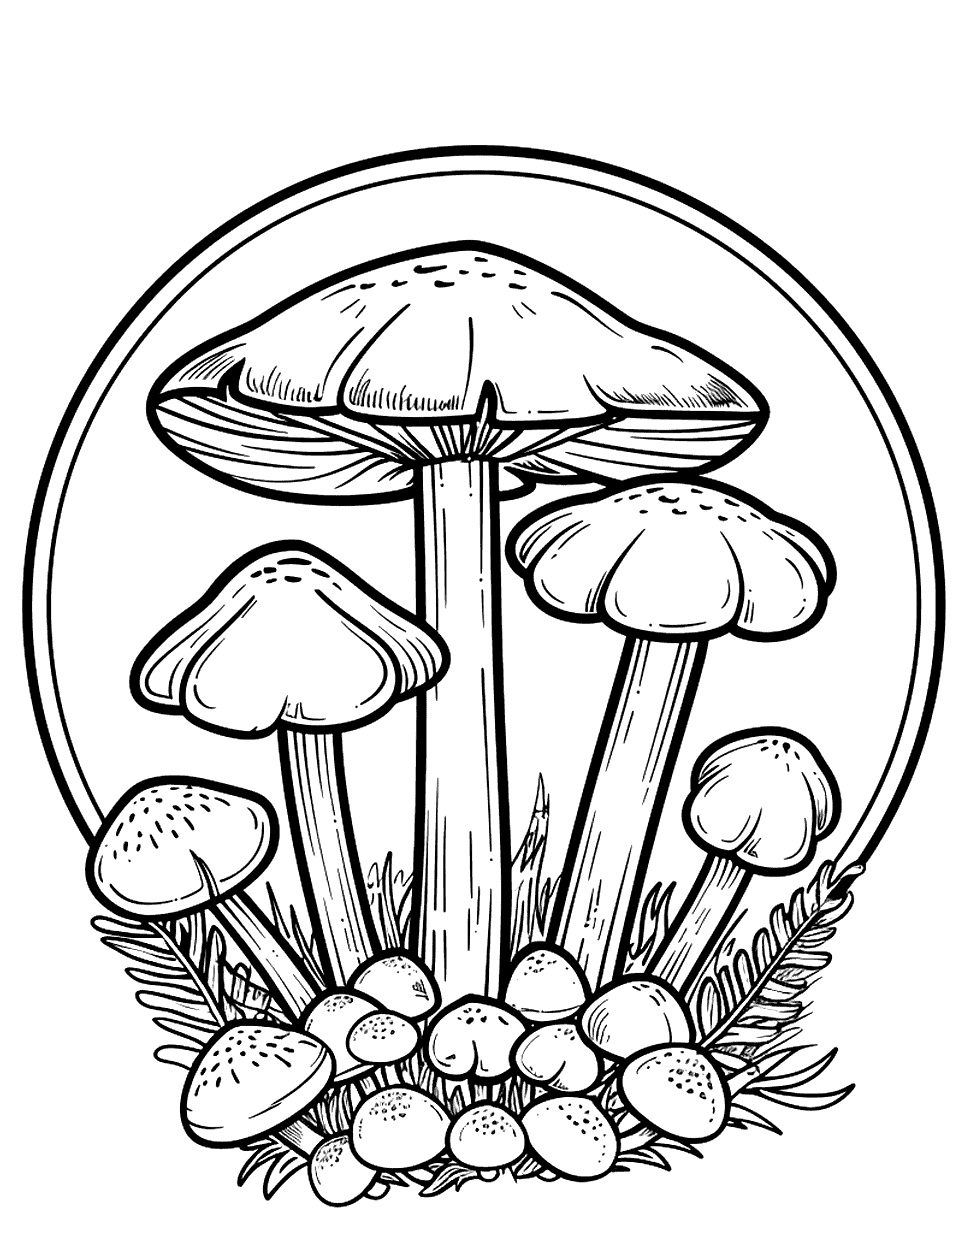 Mushroom Ring in a Meadow Coloring Page - A fairy ring of mushrooms set in a wide, open meadow.